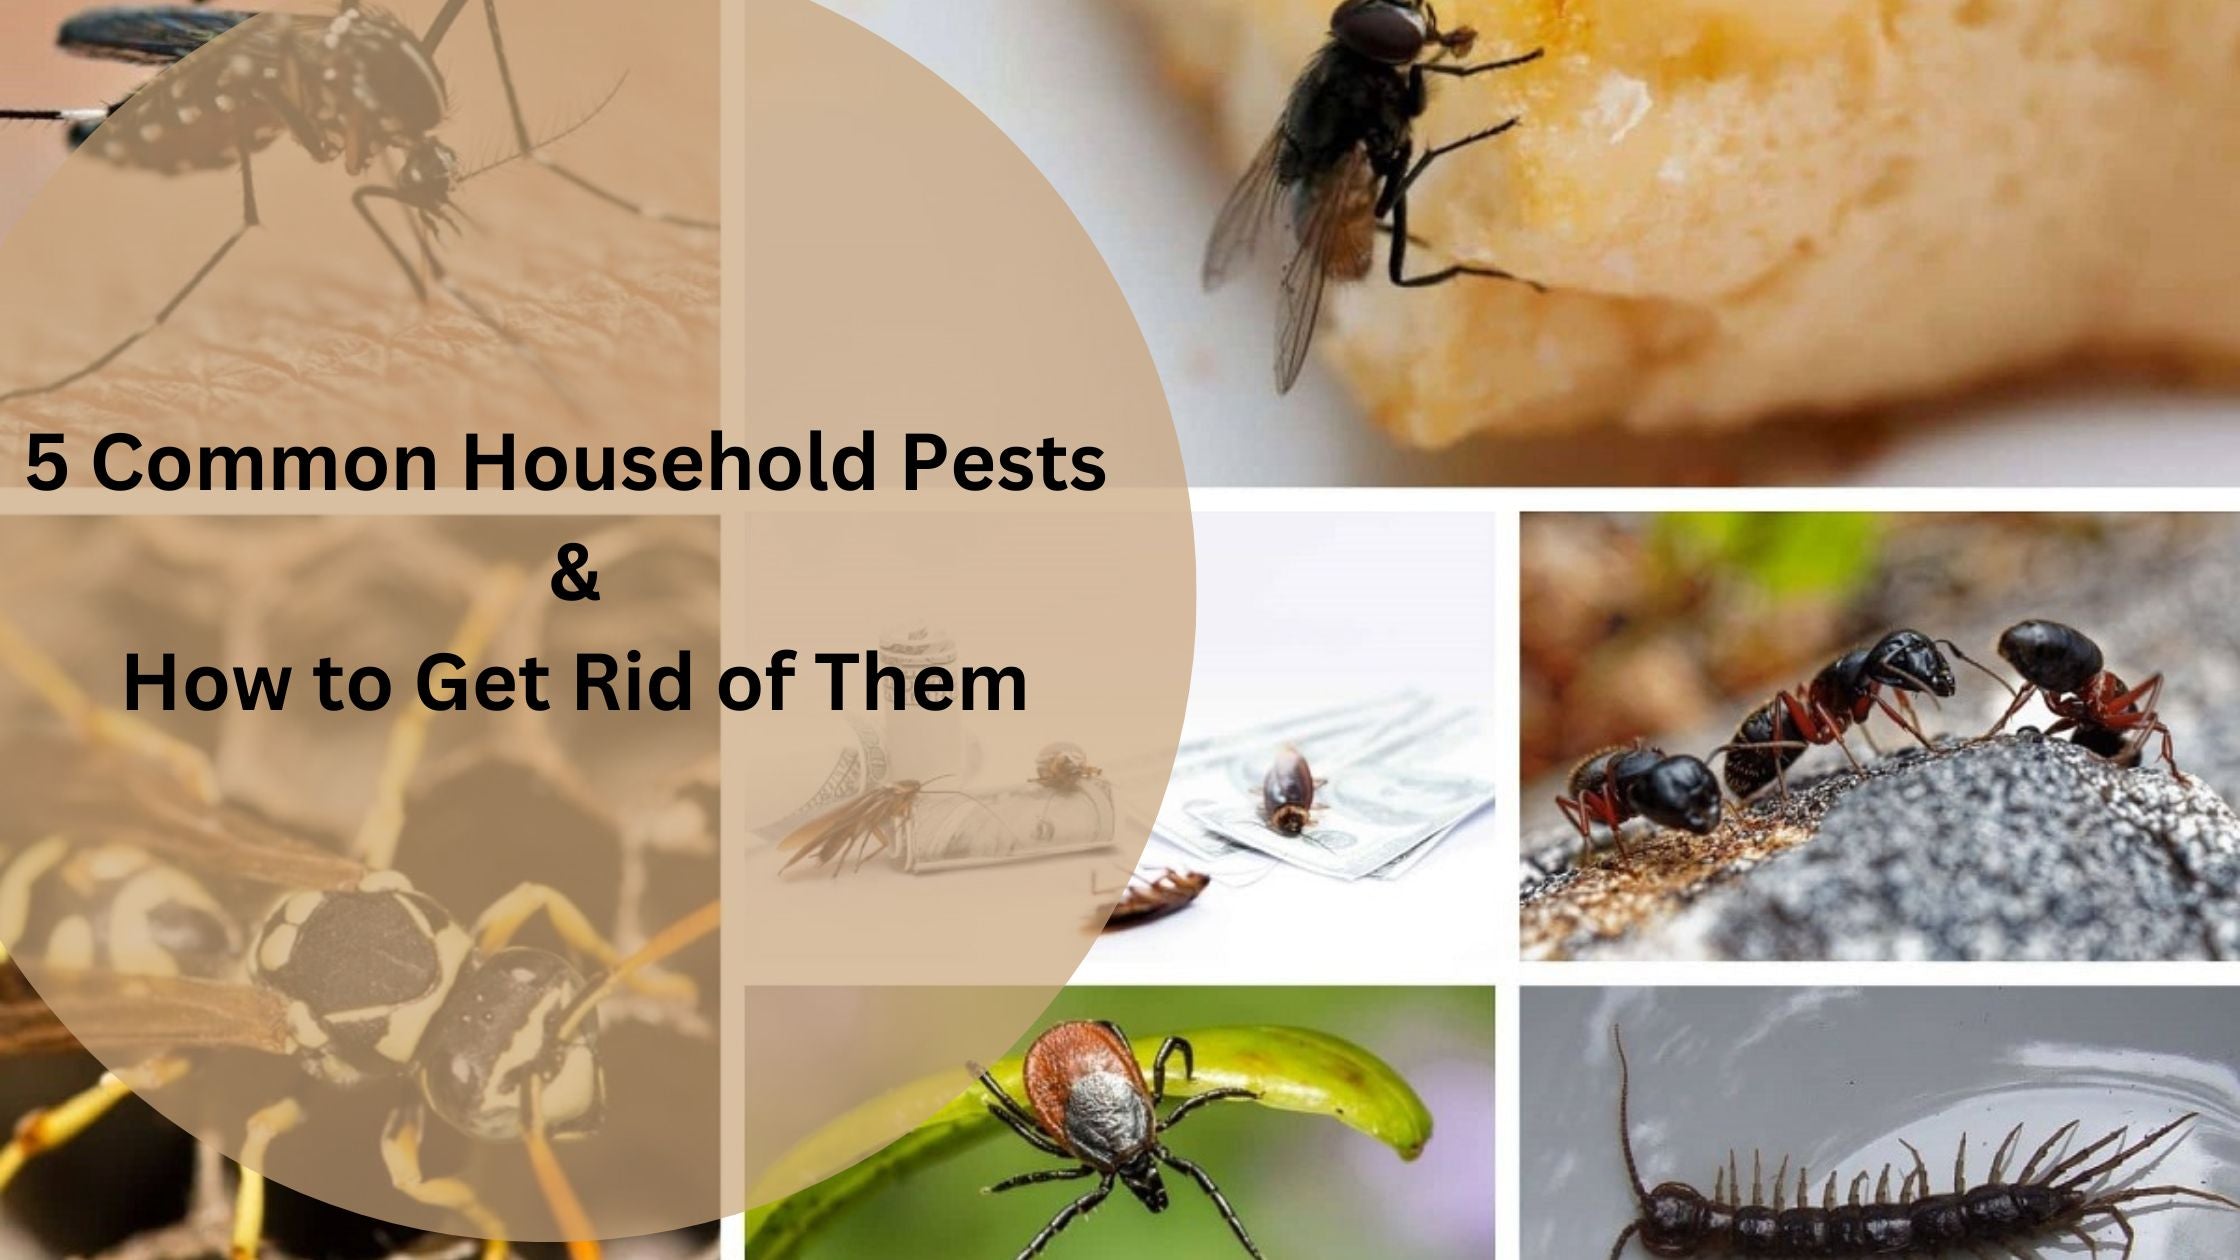 5 Common Household Pests and How to Get Rid of Them